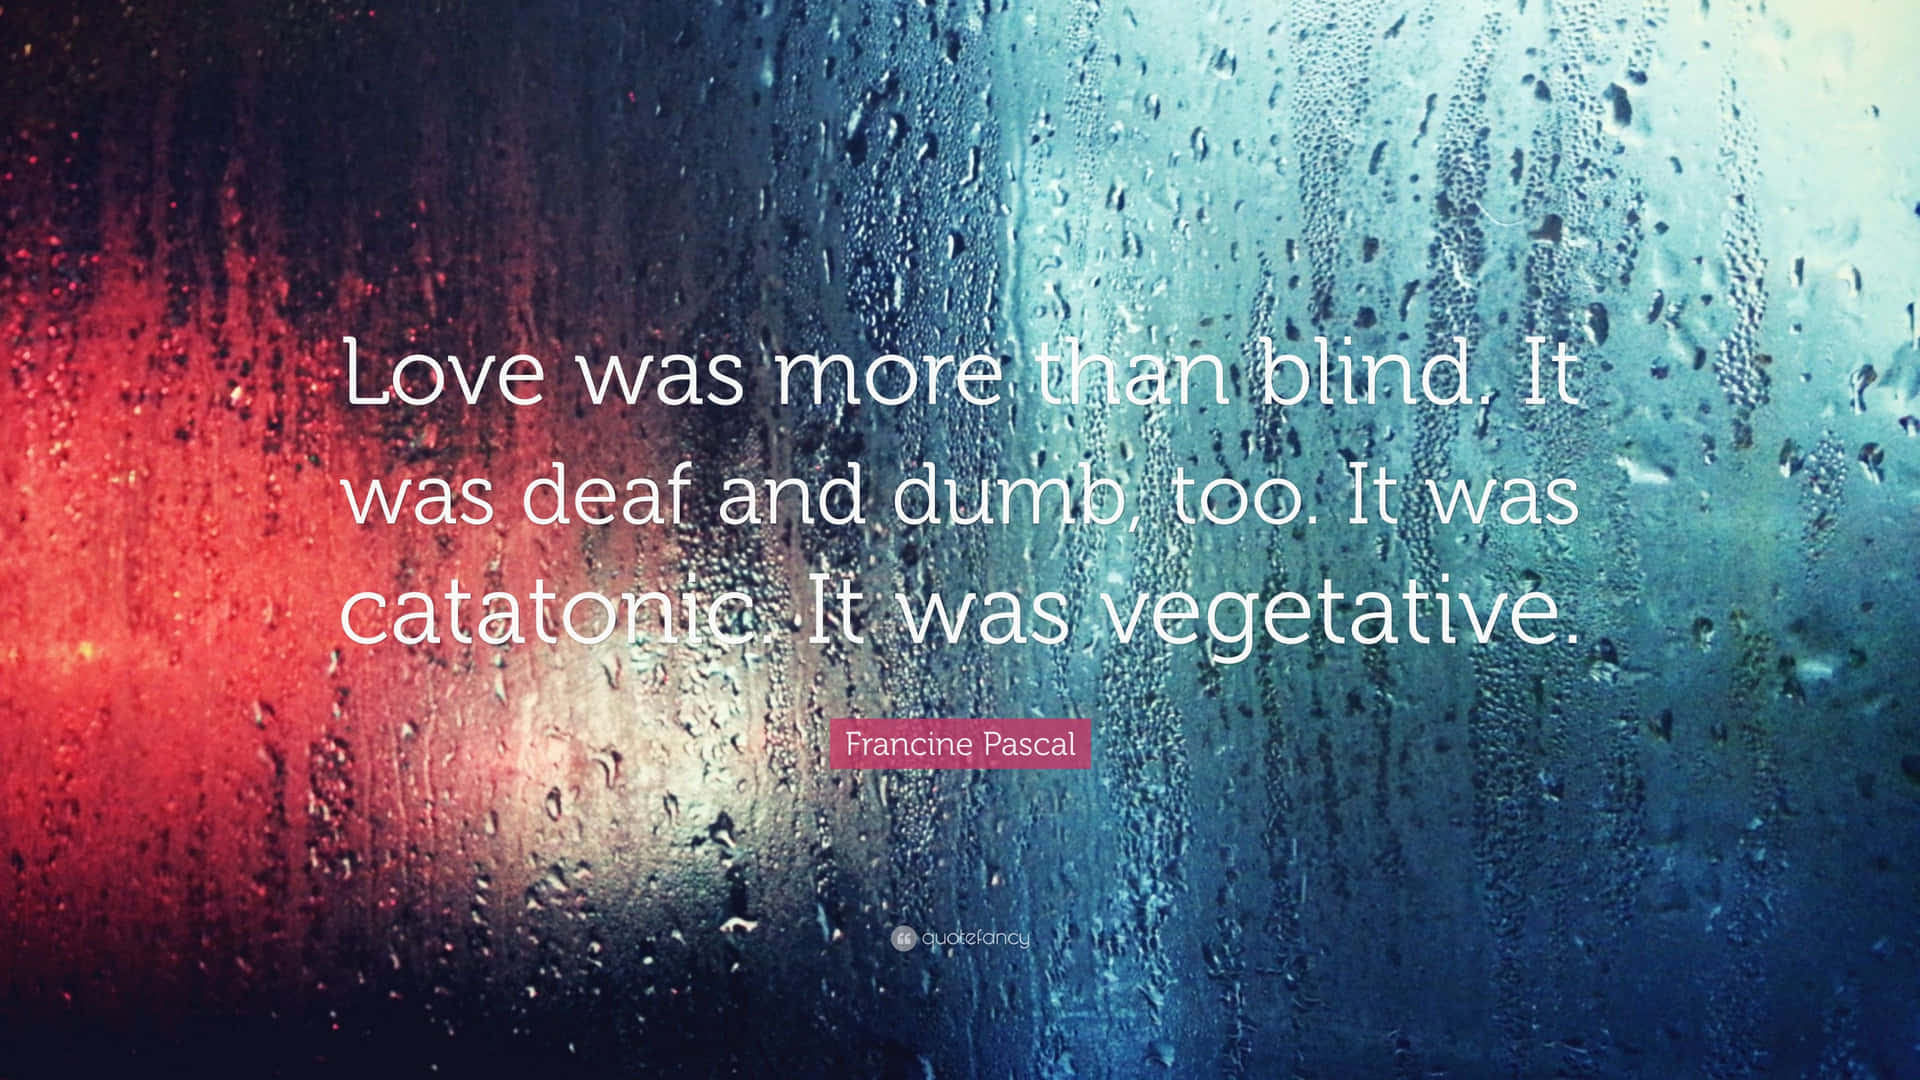 Love Was More Bird Than Death And Thud Too It Was A Vegetable Wallpaper